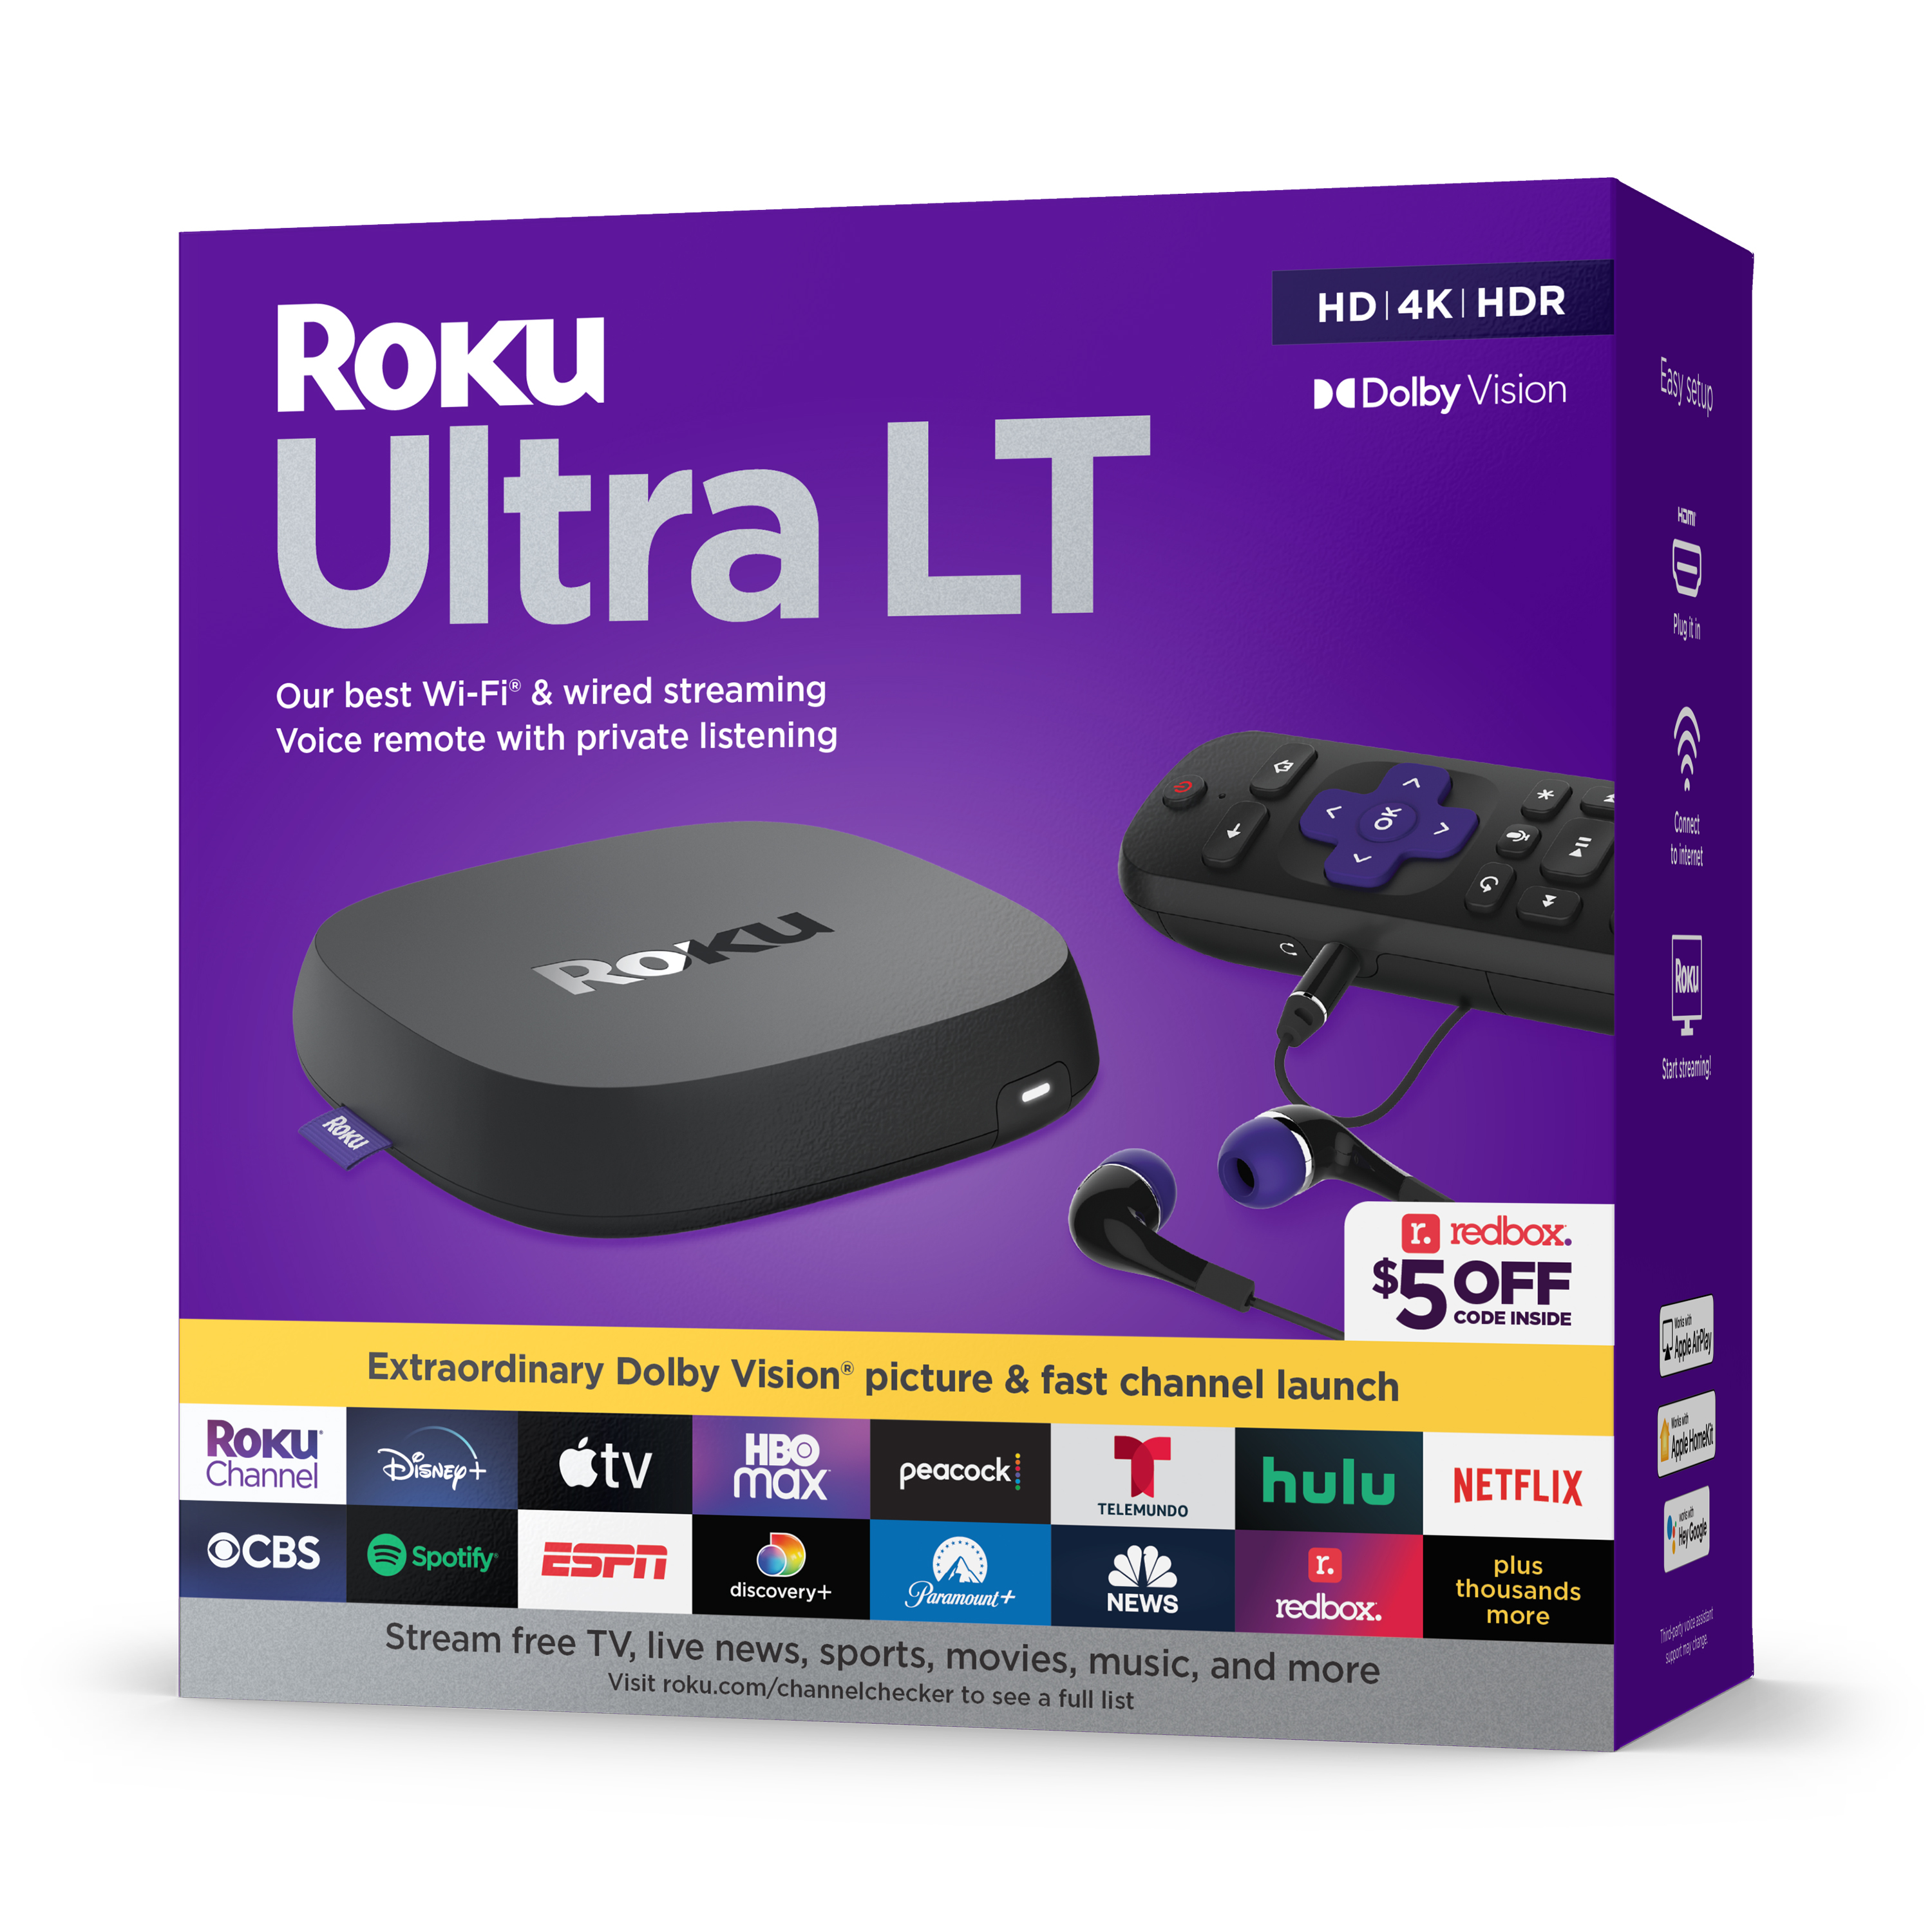 Roku Ultra LT Streaming Device 4K/HDR/Dolby Vision/Dual-Band Wi-Fi® with Roku Voice Remote and HDMI Cable - image 1 of 11